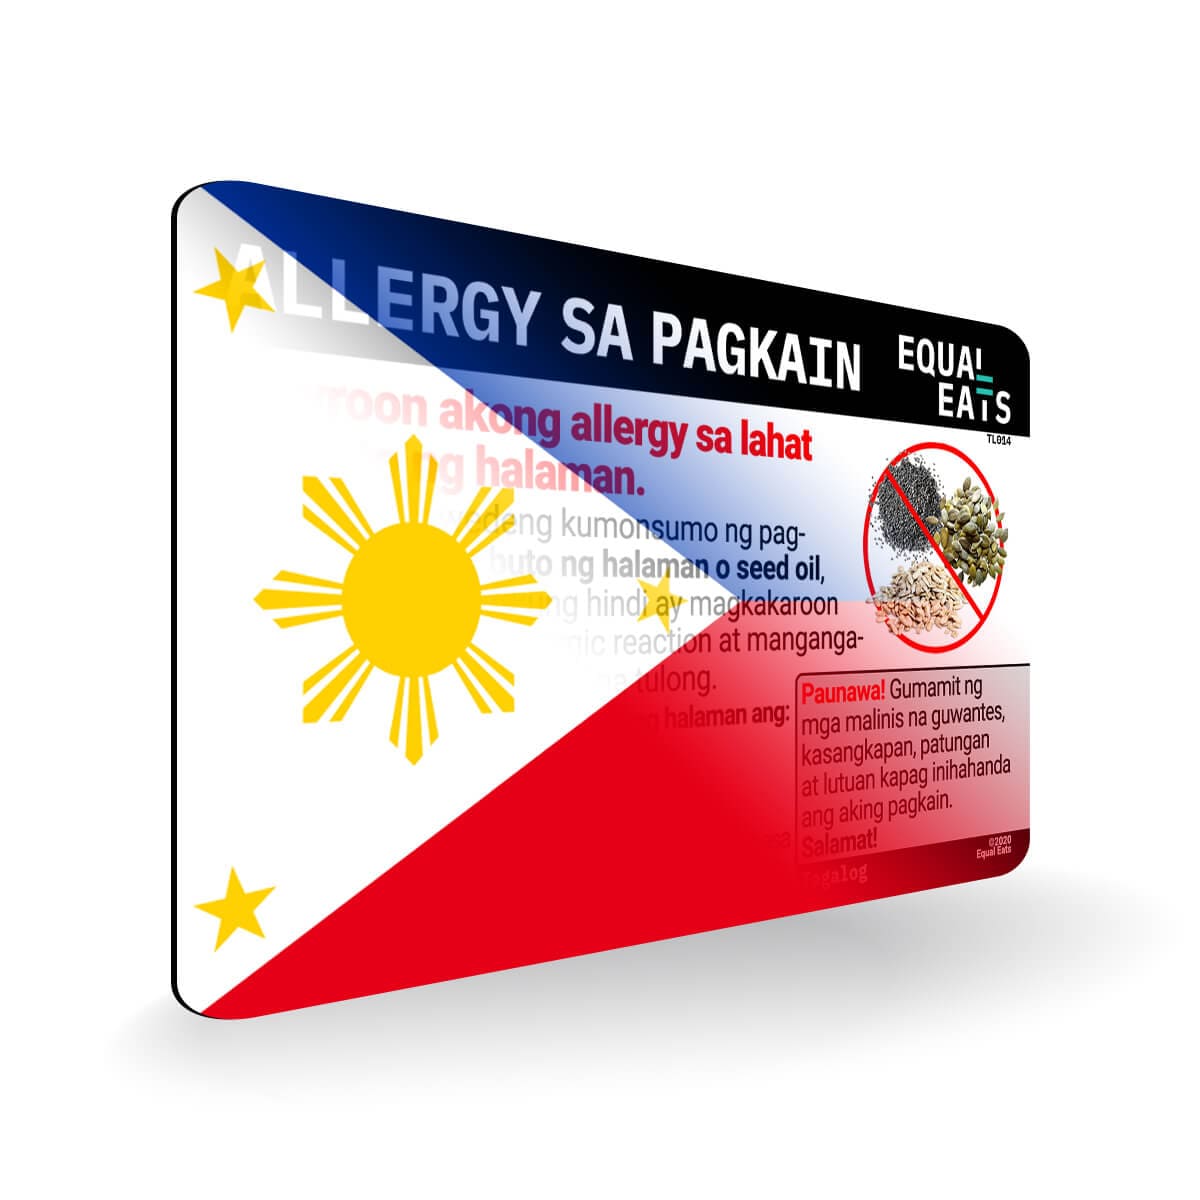 Seed Allergy in Tagalog. Seed Allergy Card for Philippines